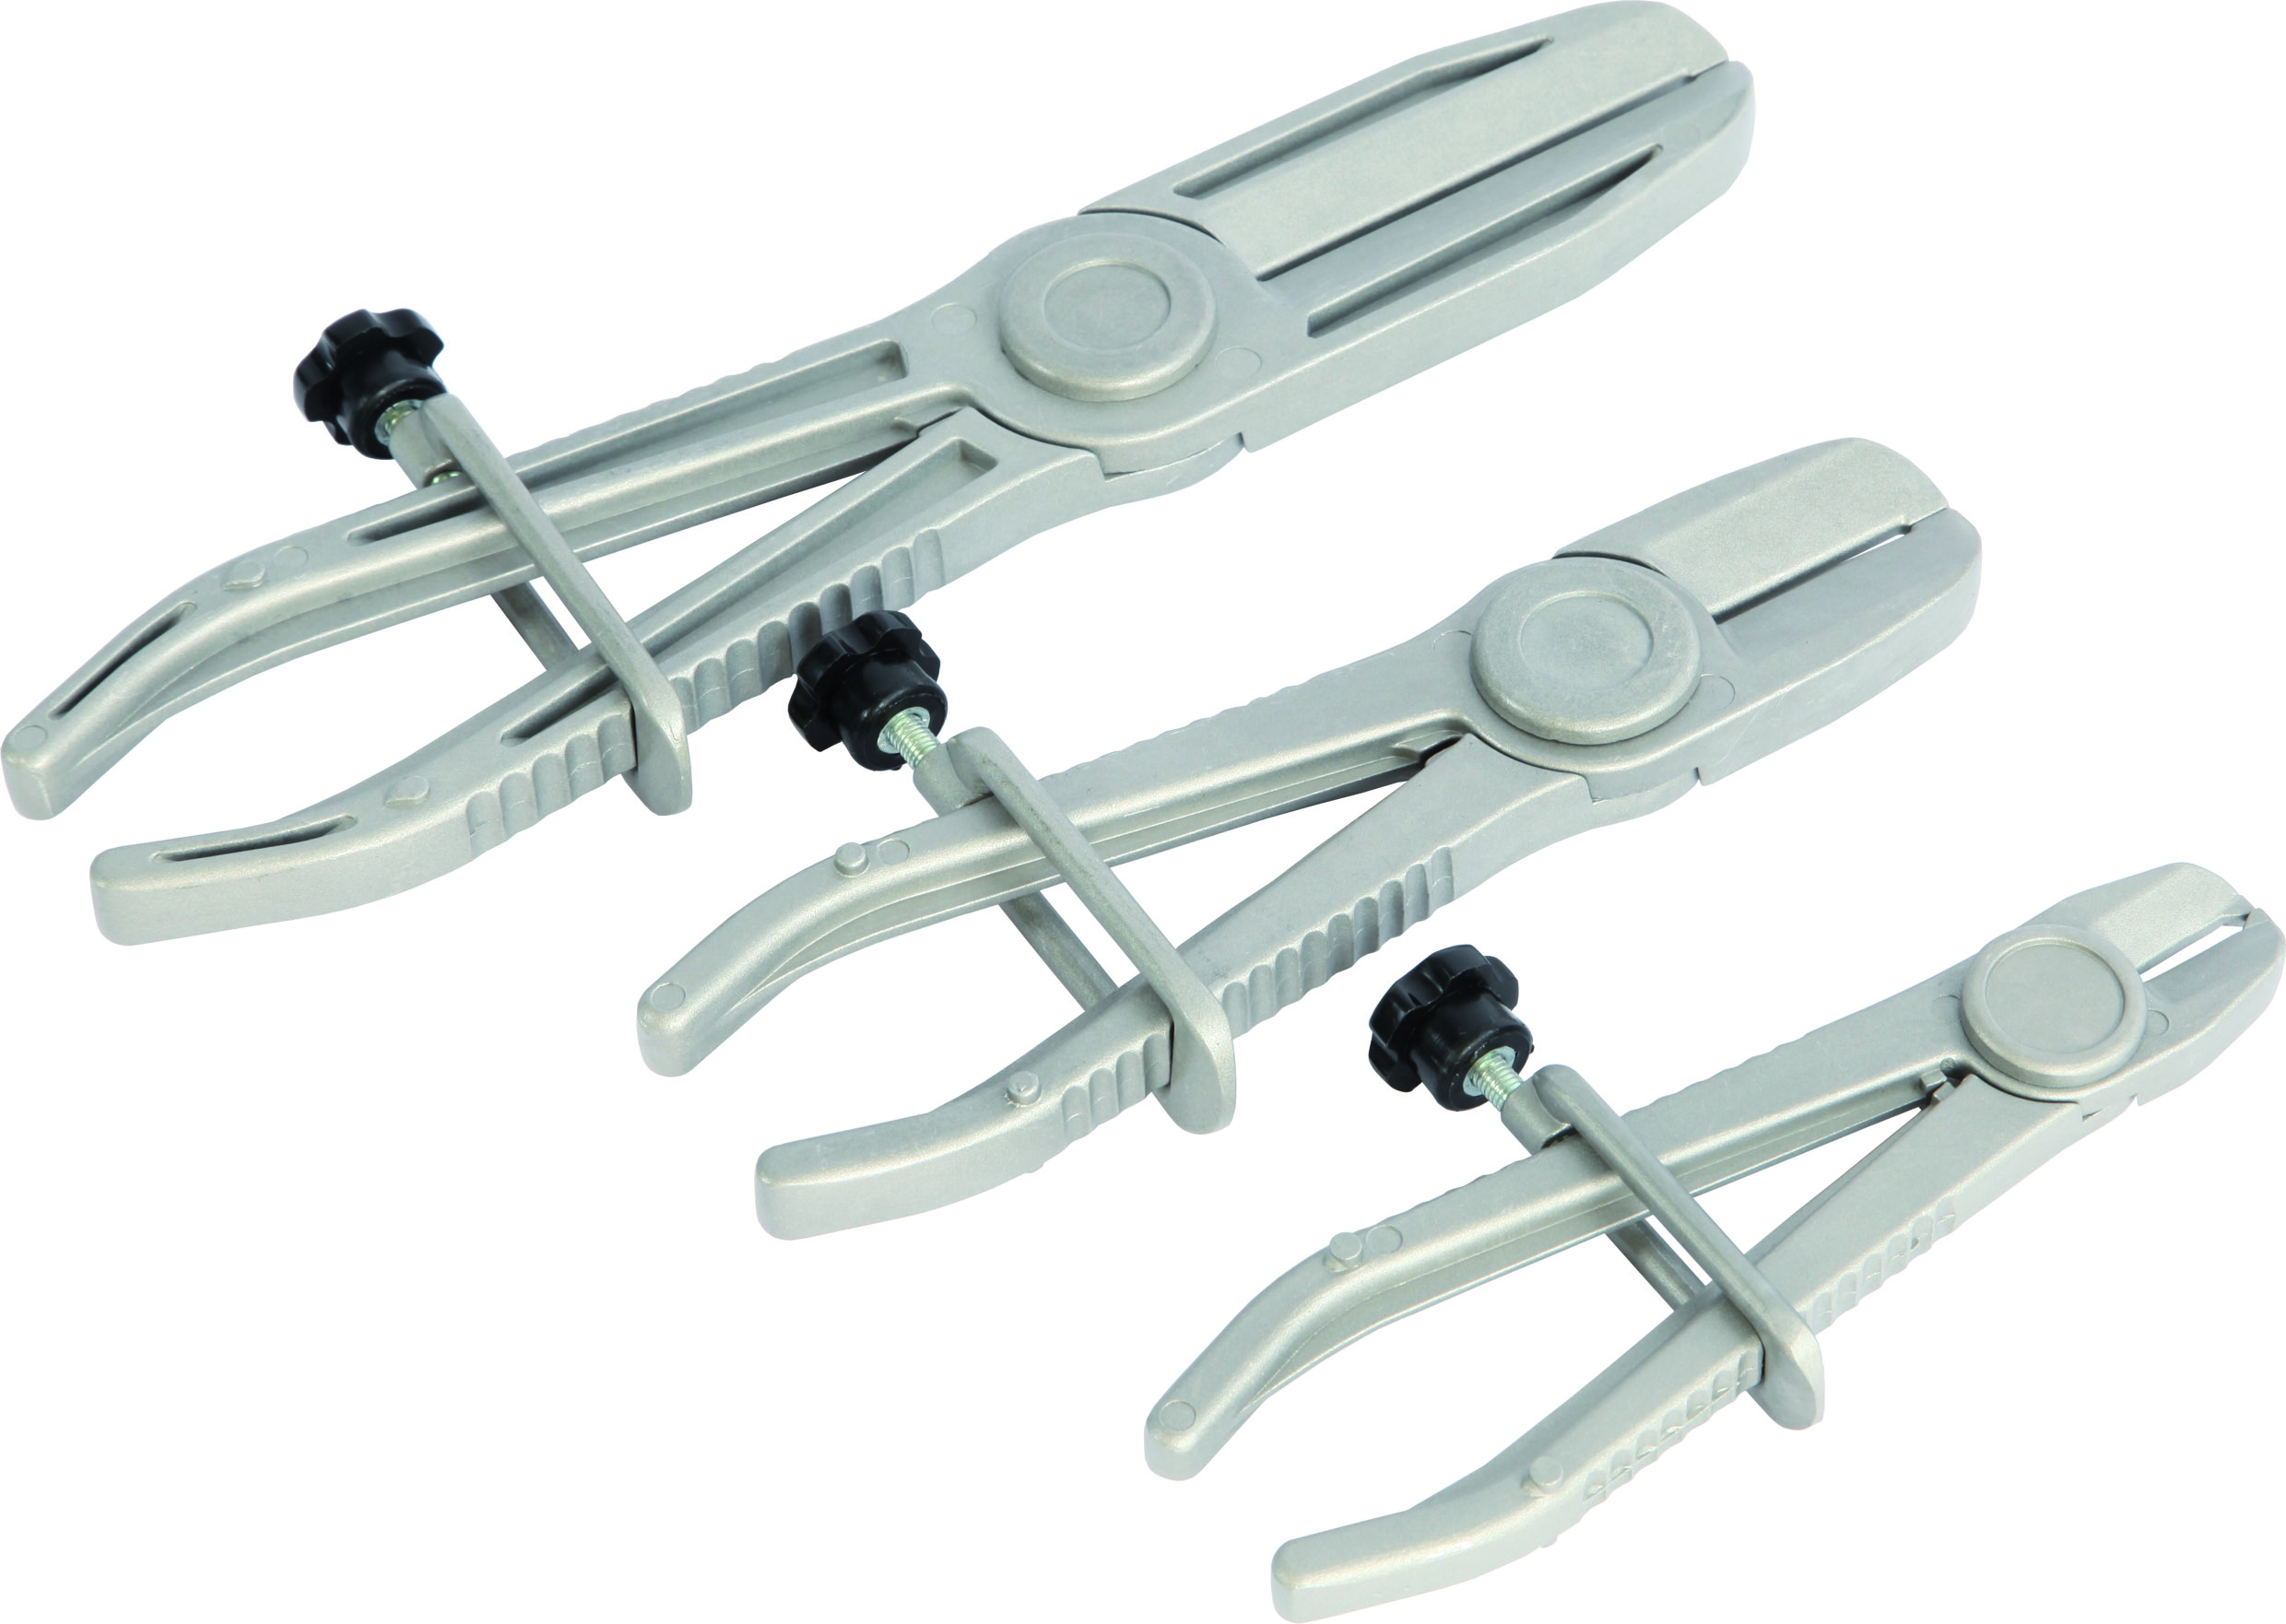 Tube clamping tong set, 3-part for tube diameter of 11 mm to 60 mm